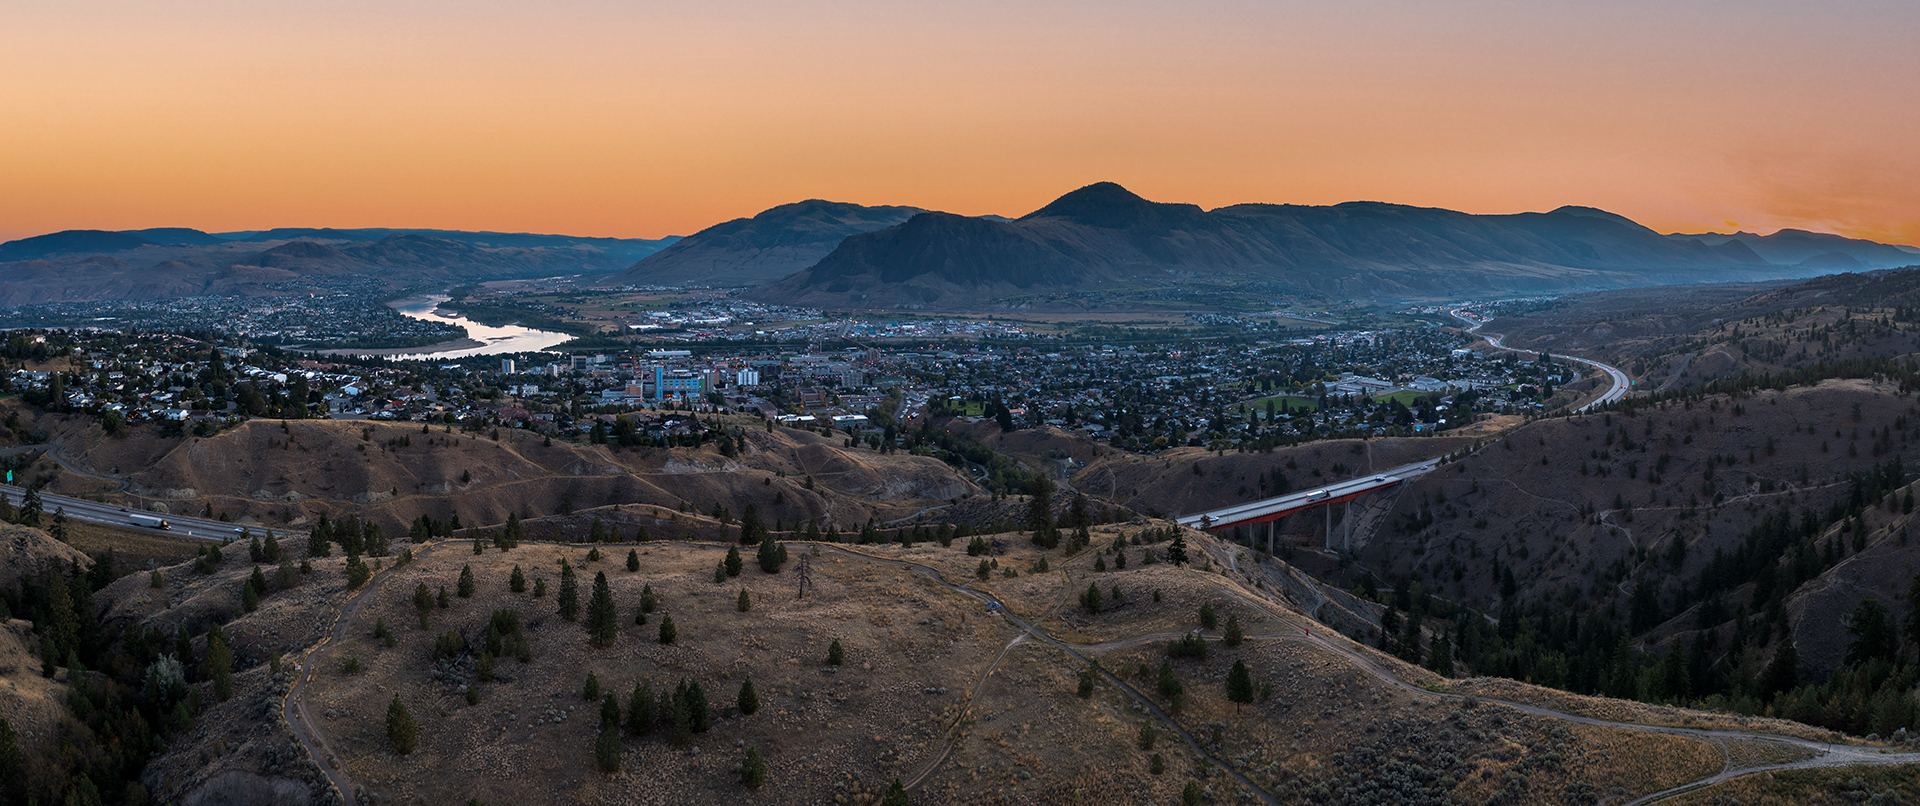 HDR Panoramic of Kamloops City hills with trees